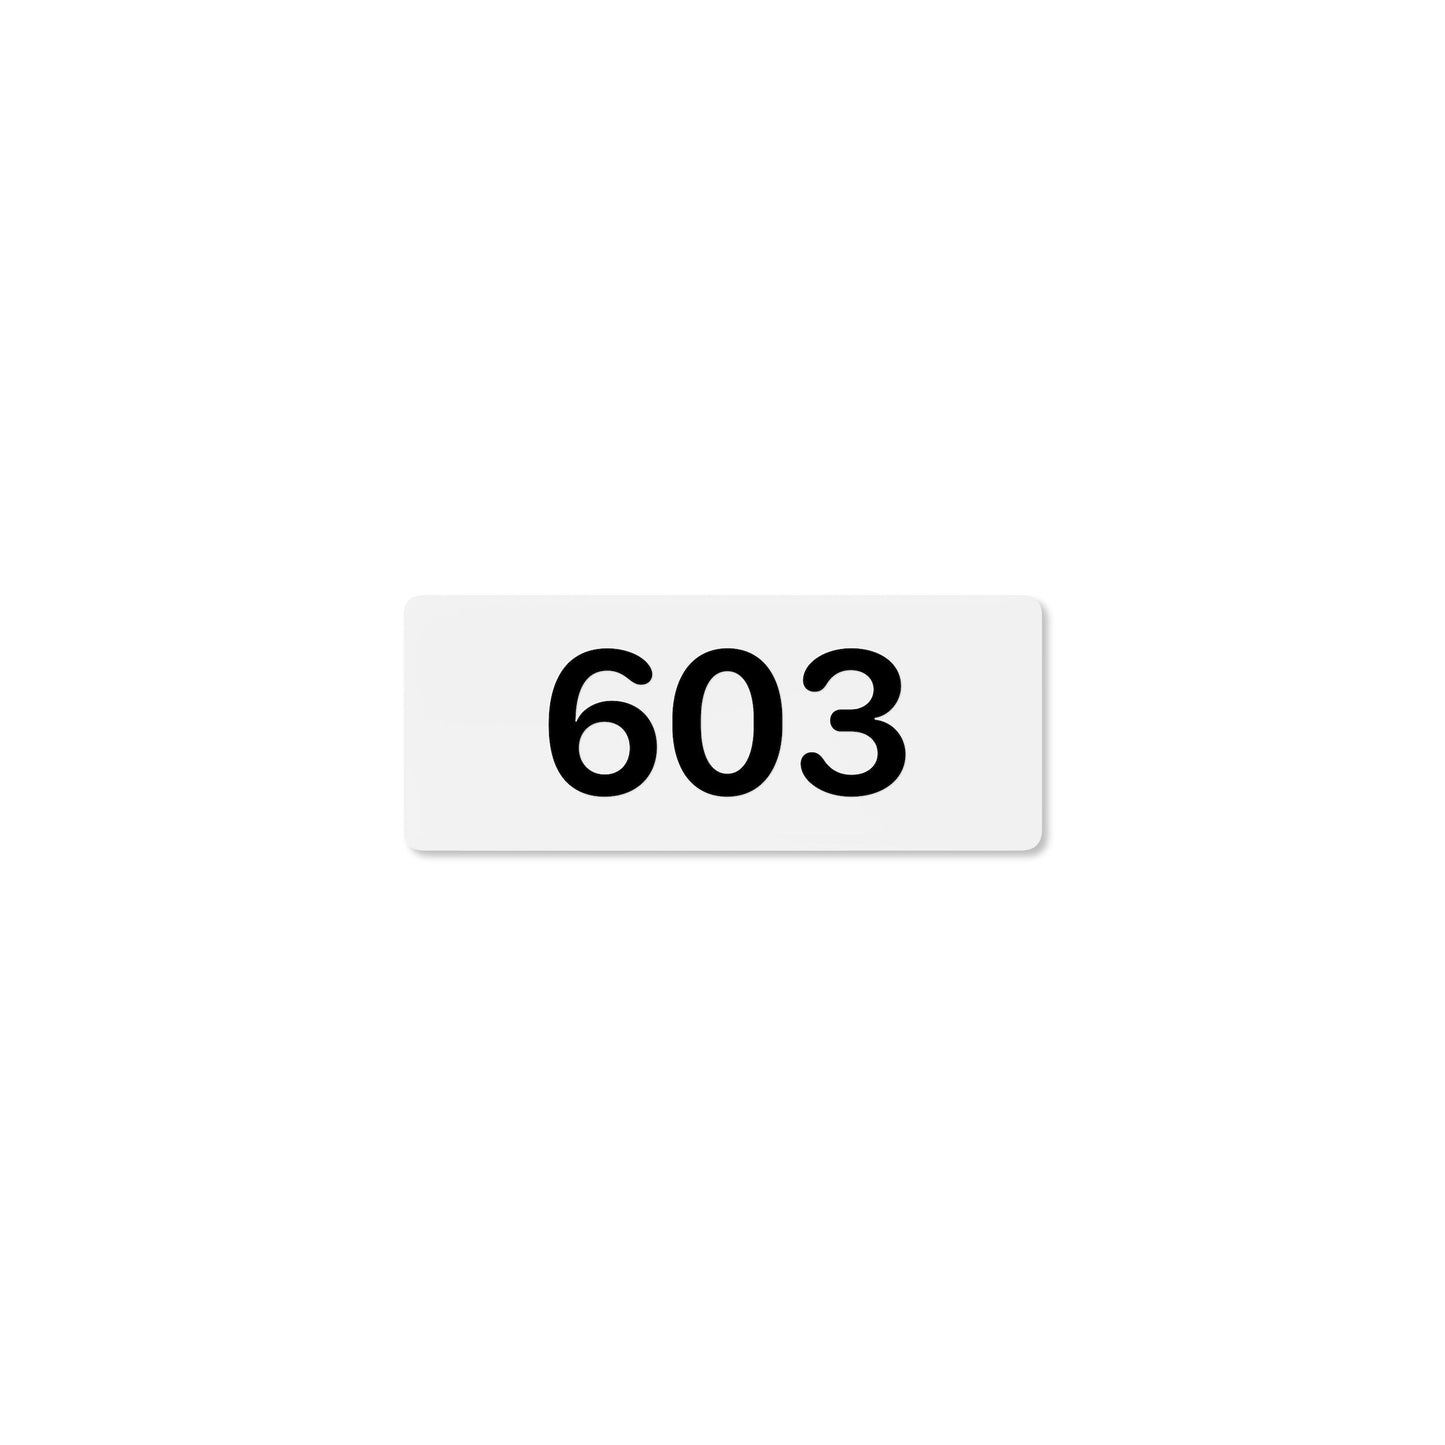 Numeral 603